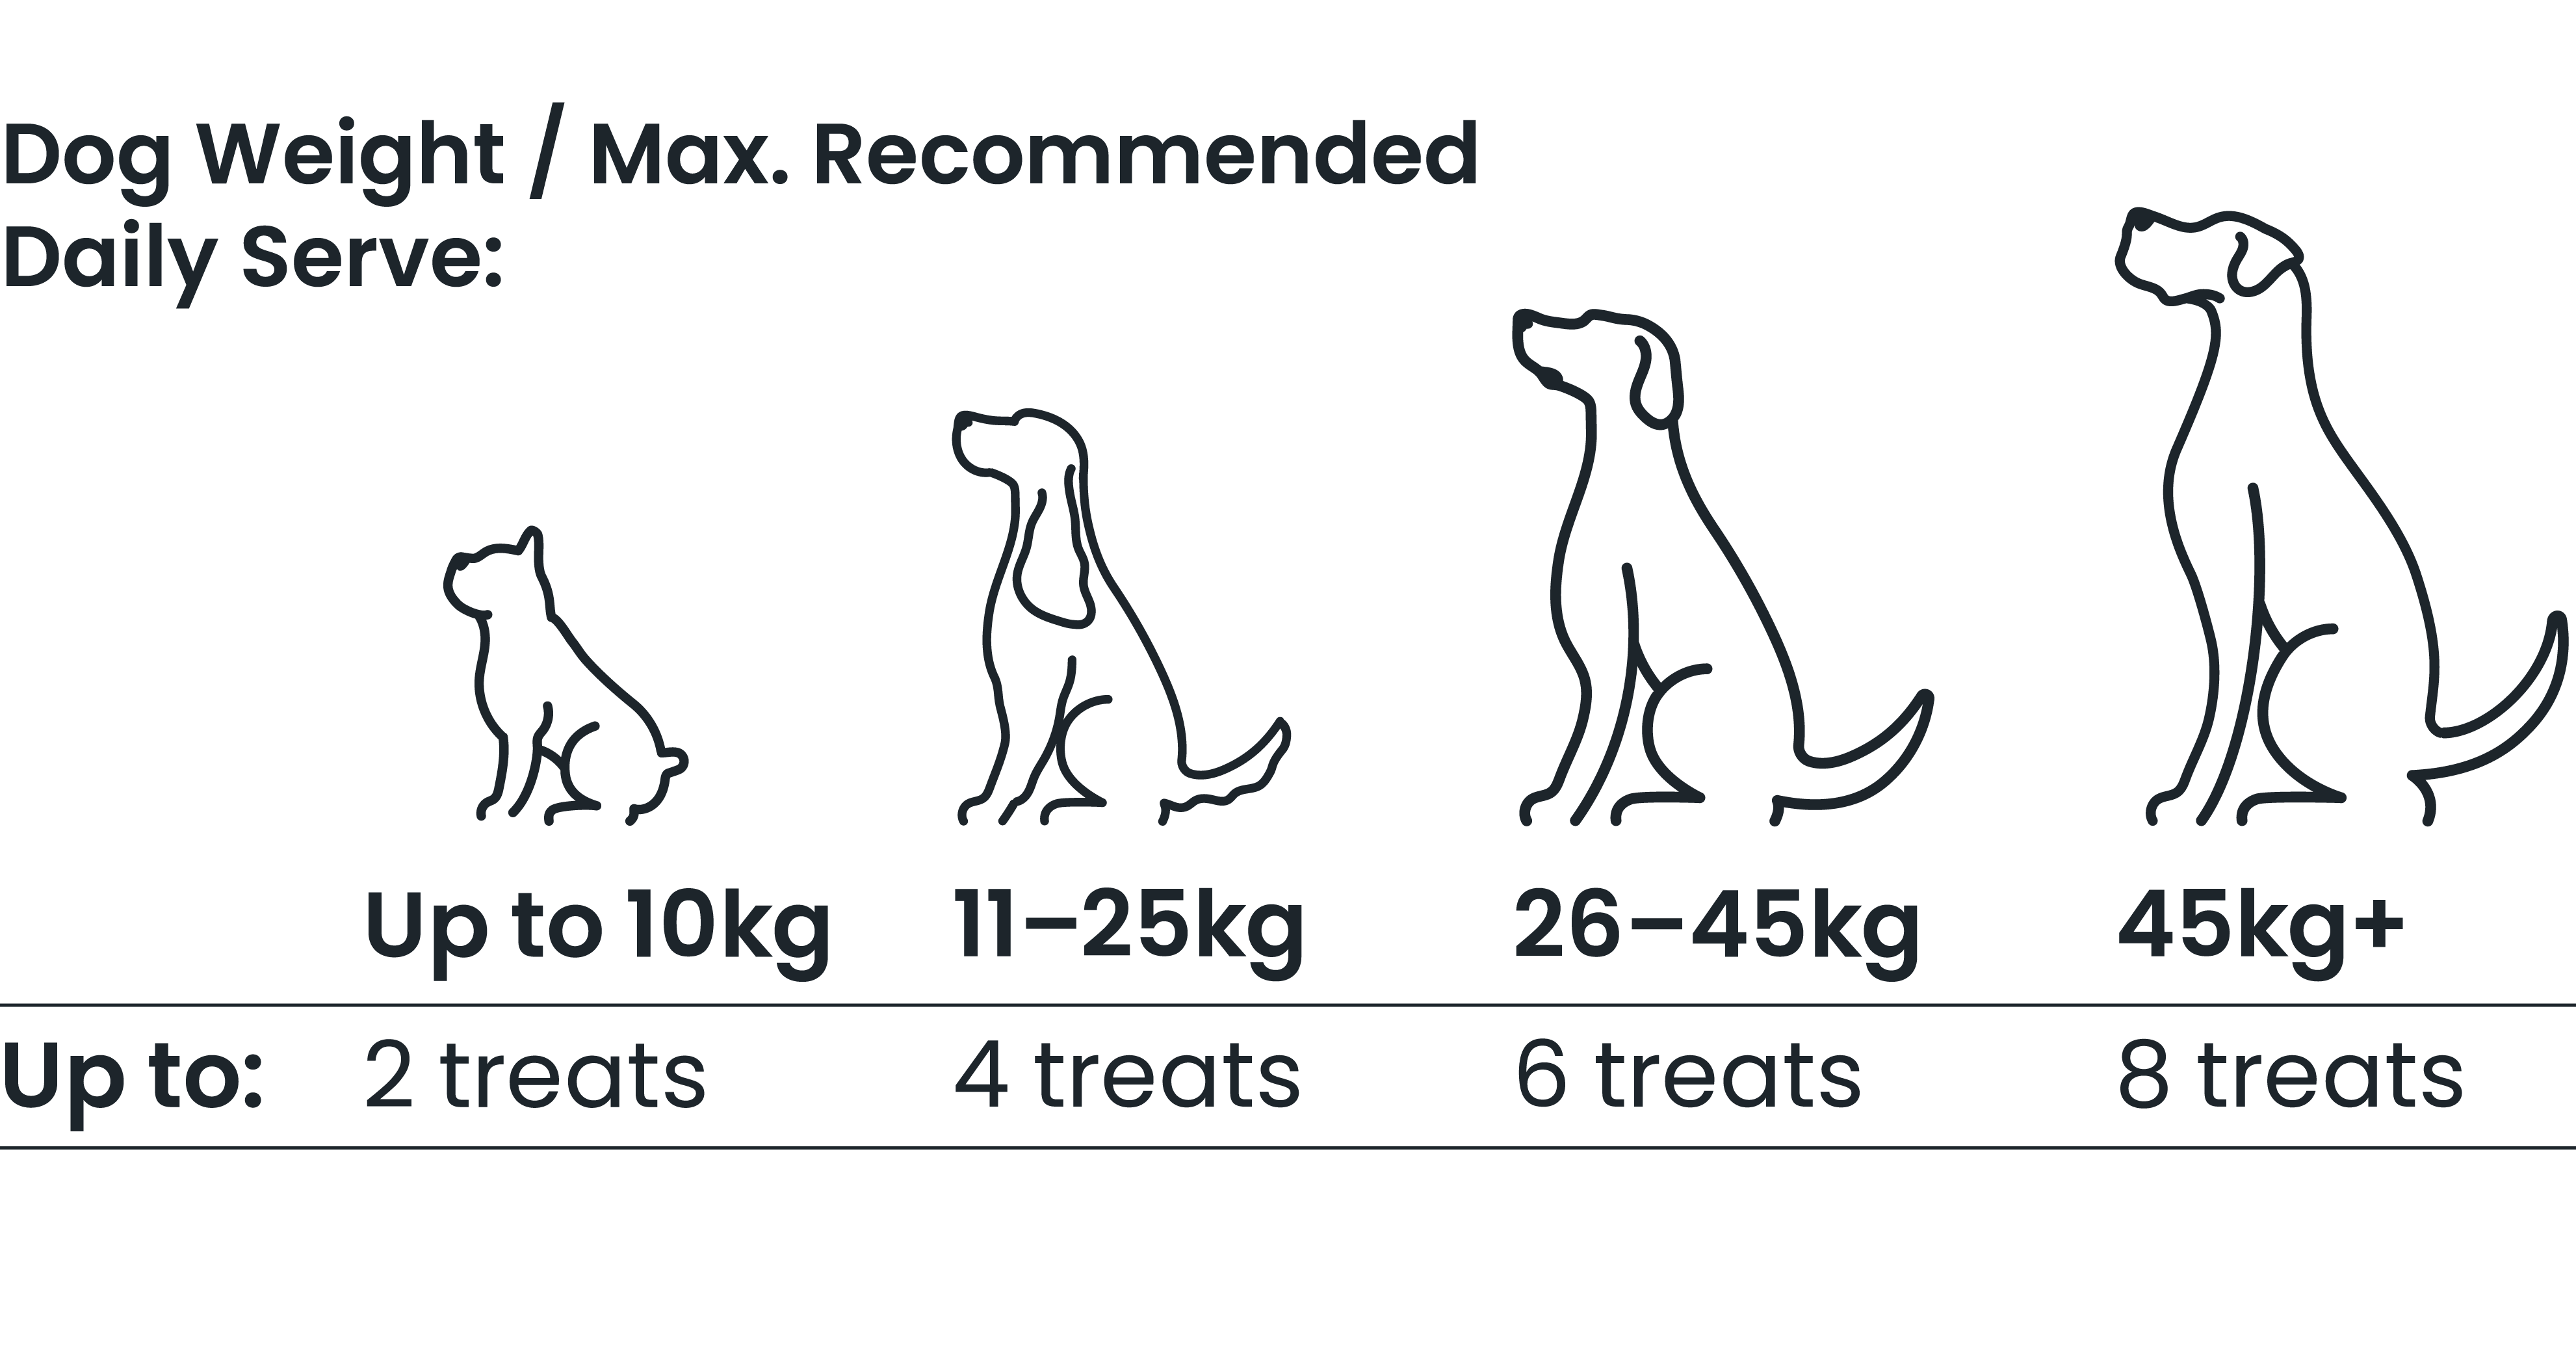 ZamiPet HappiTreats Relax & Calm feeding guide. For dogs up to 10kg, max 2 treats per day. For 11kg-25kg dogs, up to 4 treats per day. For 26-45kg dogs, up to 6 treats per day. For dogs 45kg and over, up to 8 treats per day. 